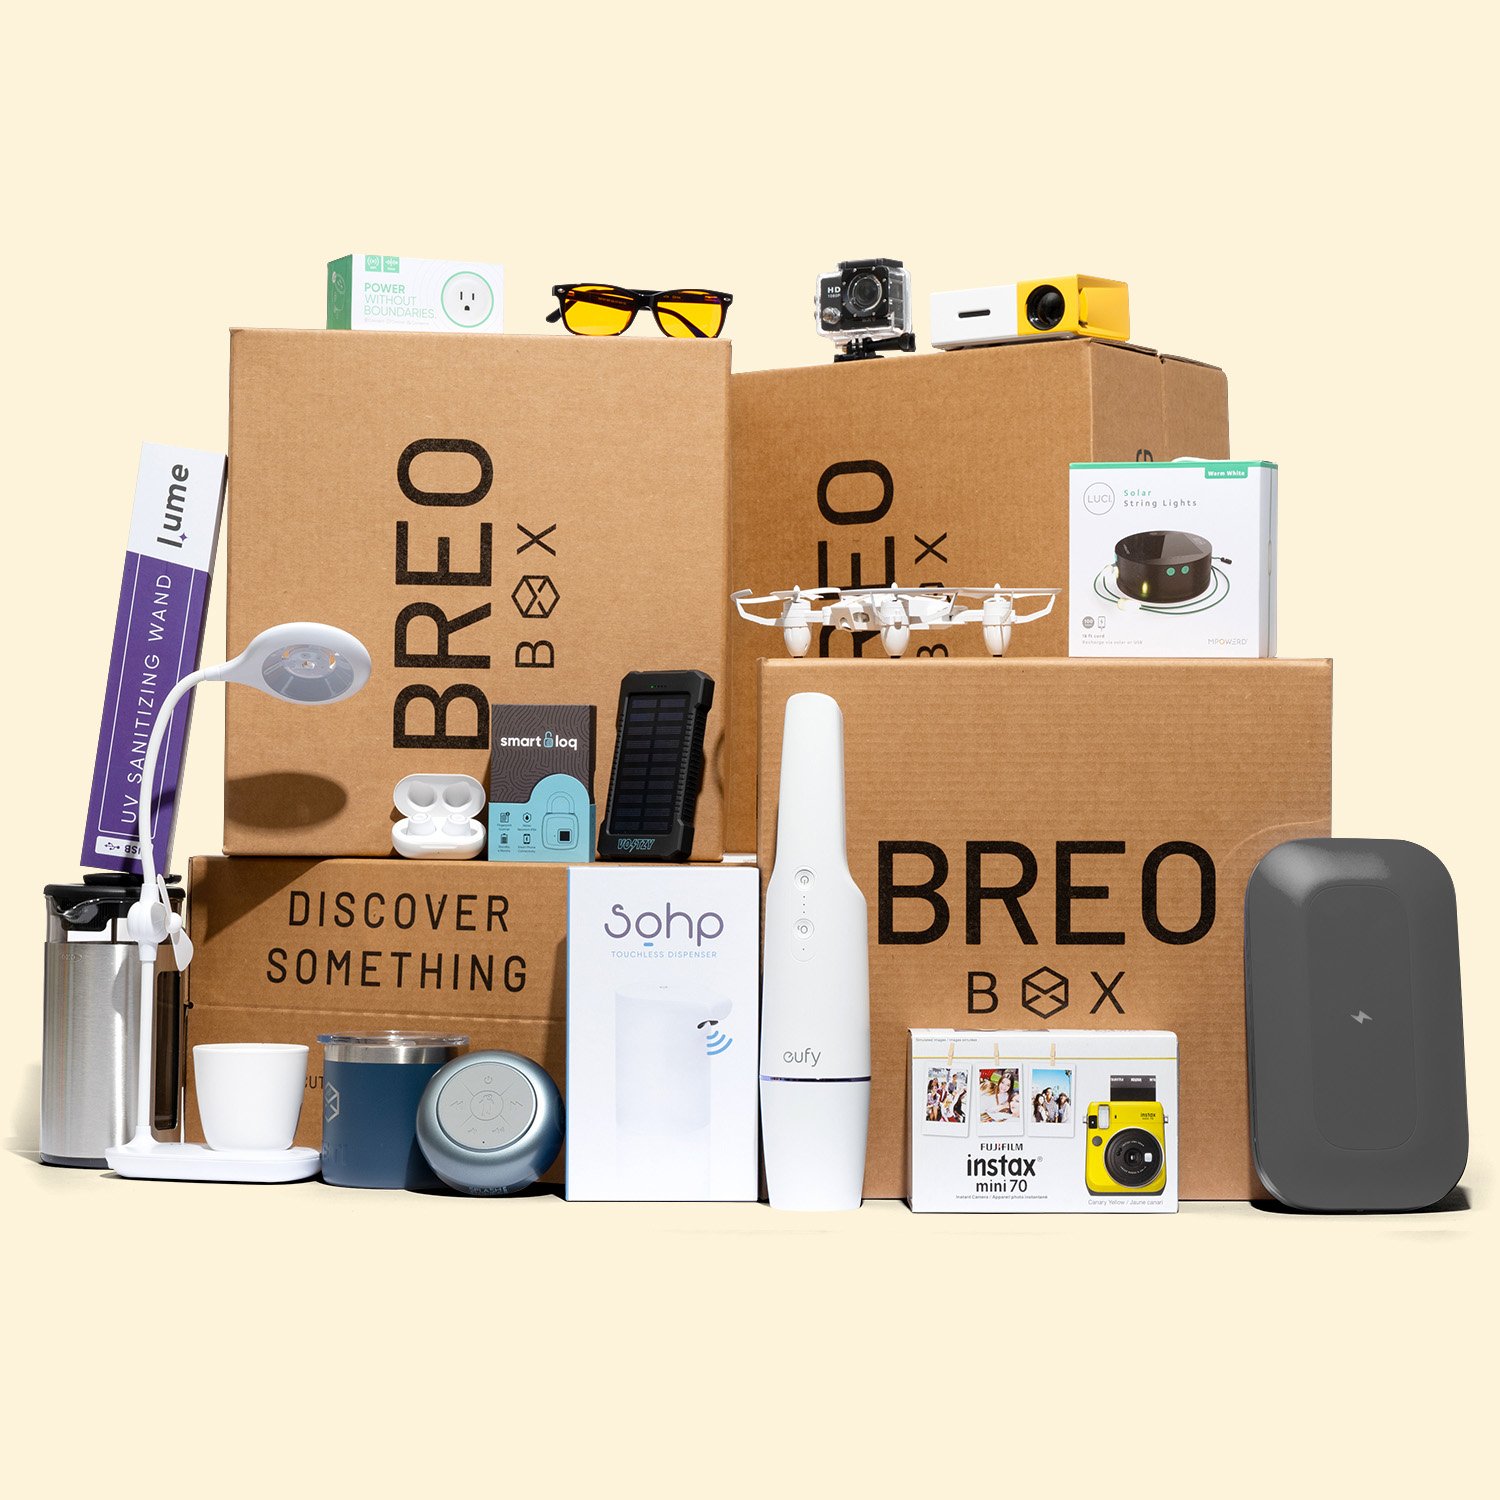 Breo Box Coupons: Free Gift and 30% off Lifestyle Shop